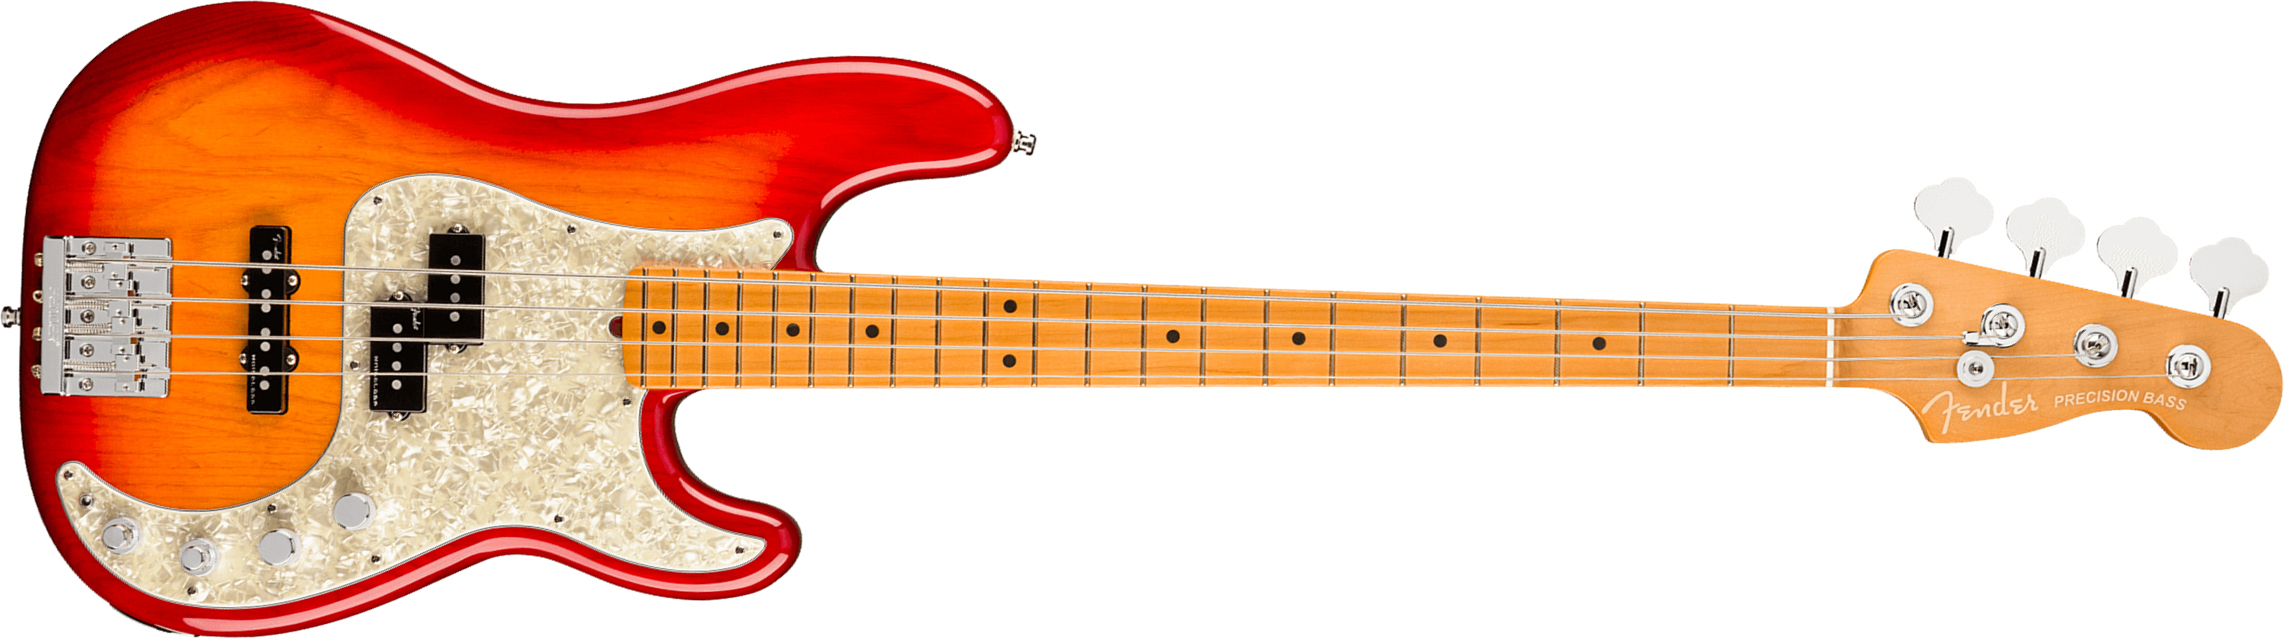 Fender Precision Bass American Ultra 2019 Usa Mn - Plasma Red Burst - Basse Électrique Solid Body - Main picture